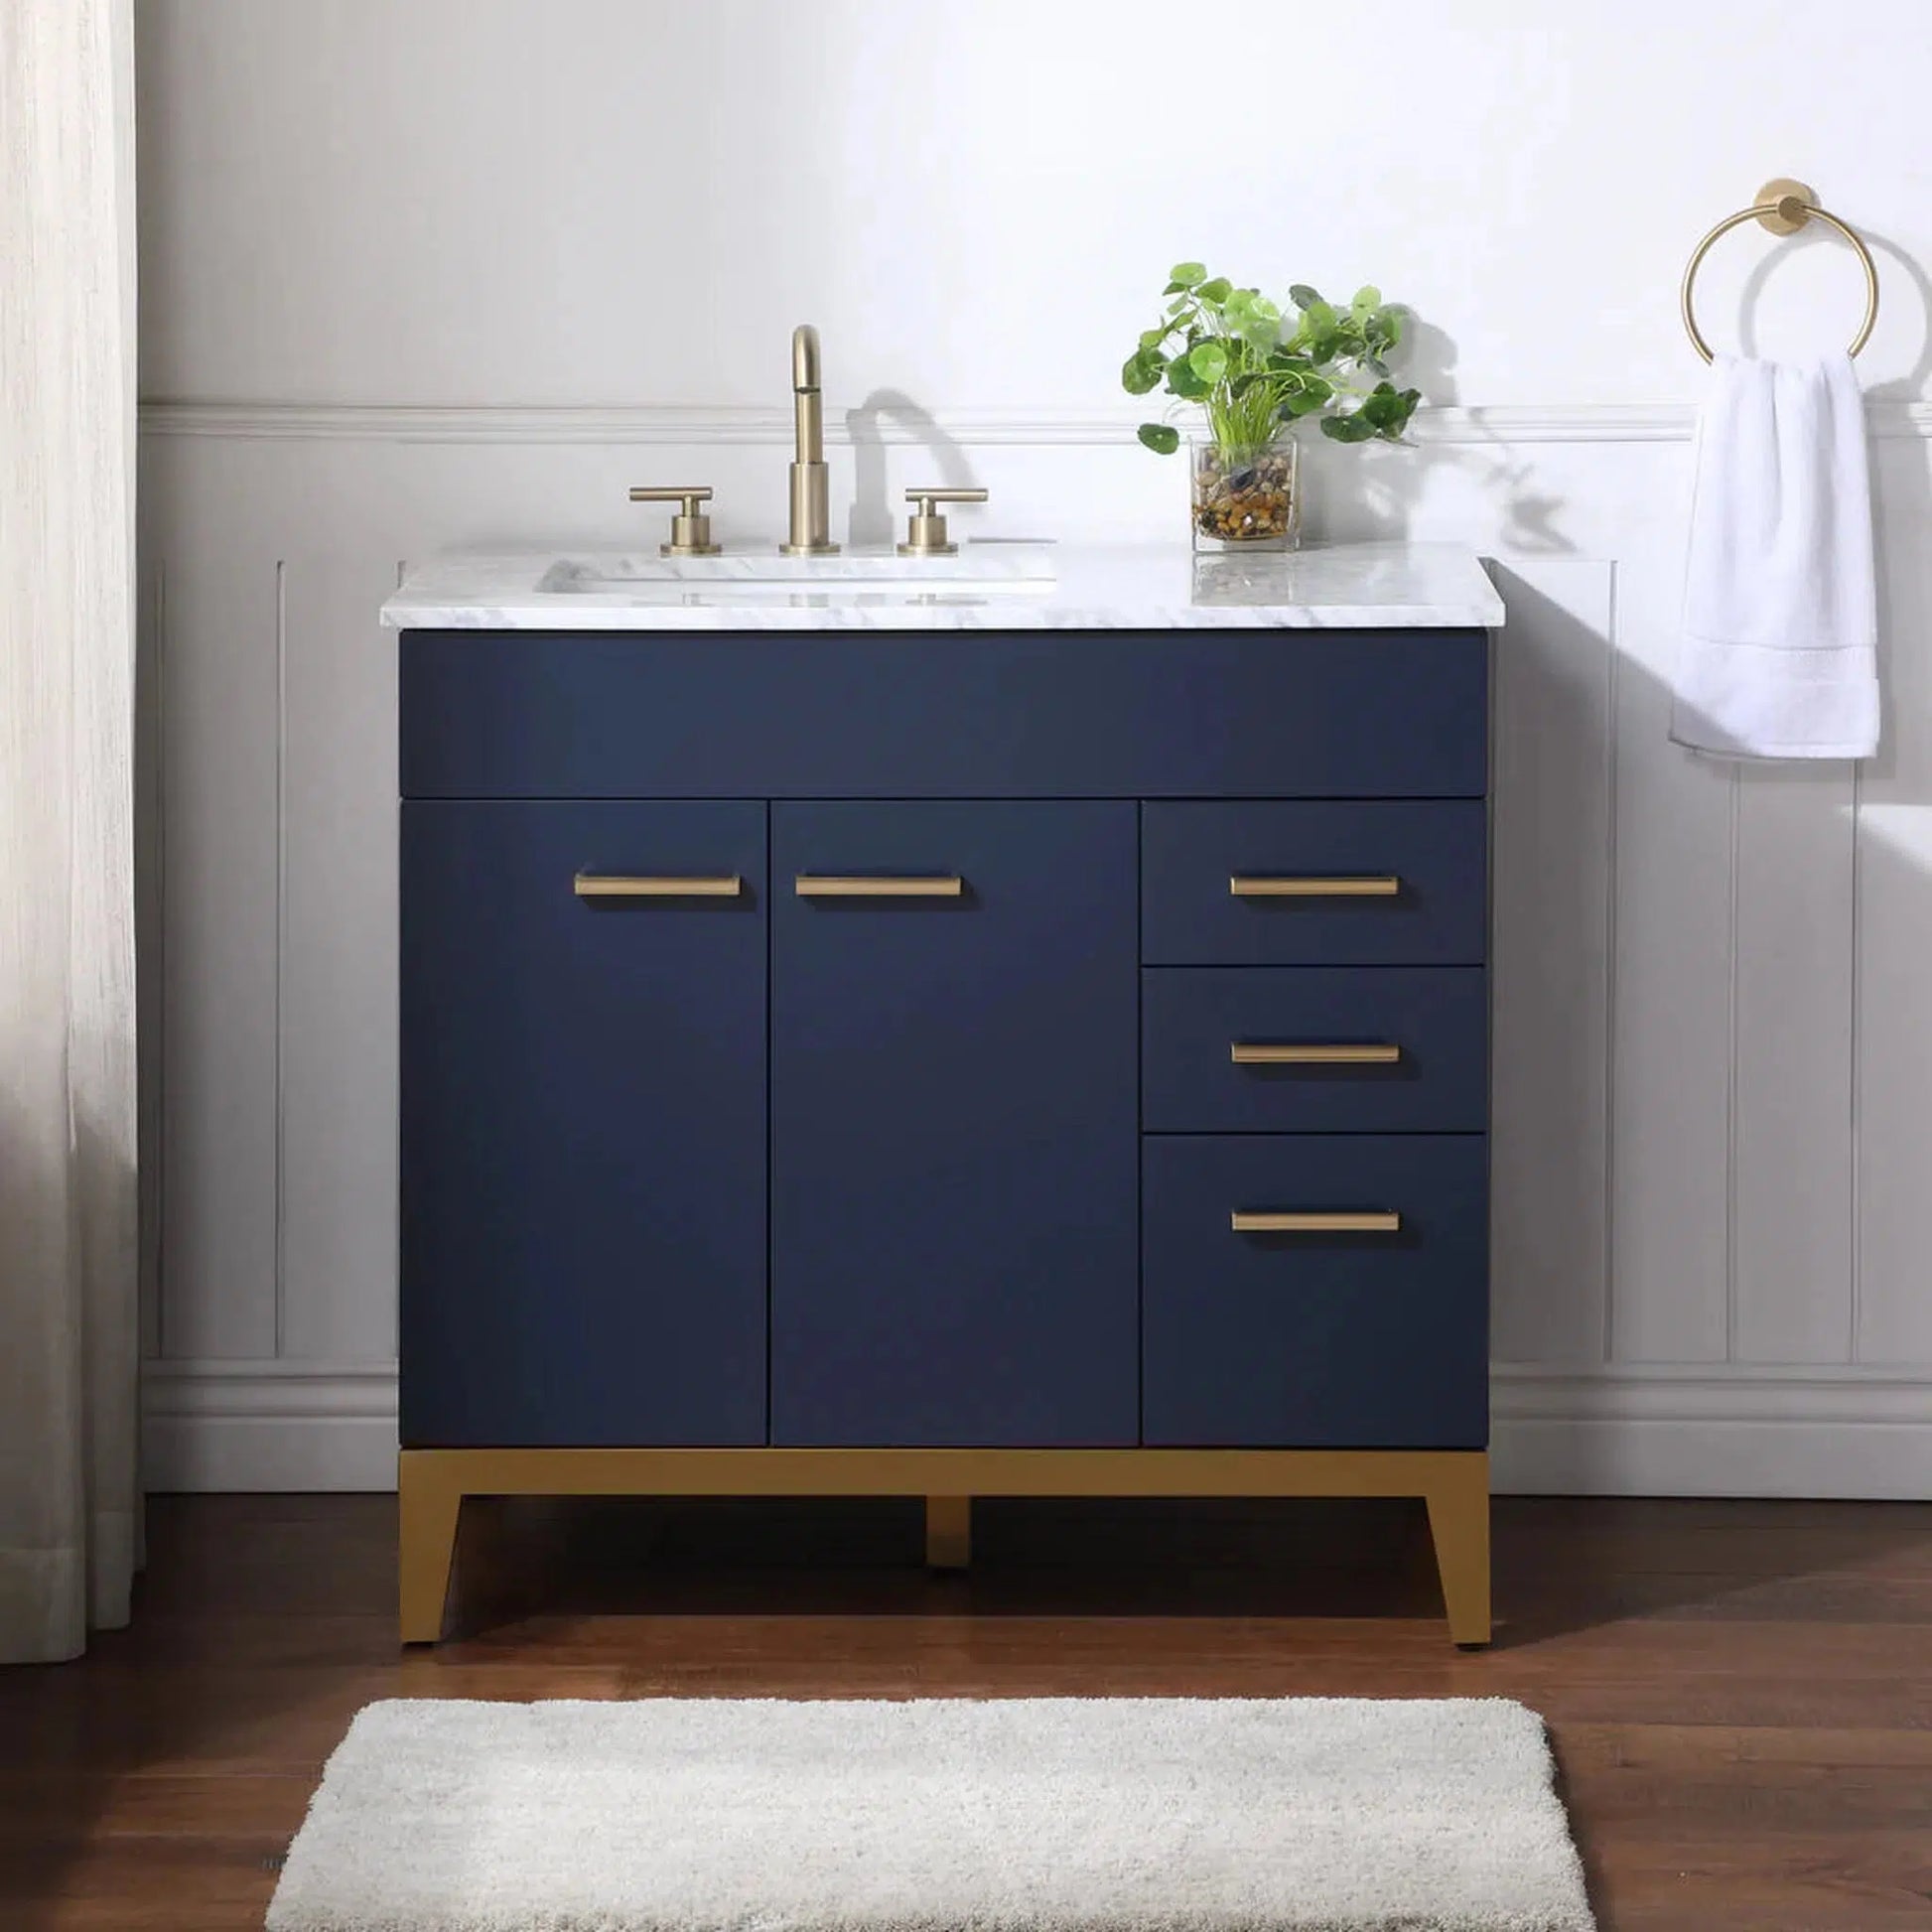 Bathroom Vanity Styles To Fit Your Space – Forbes Home